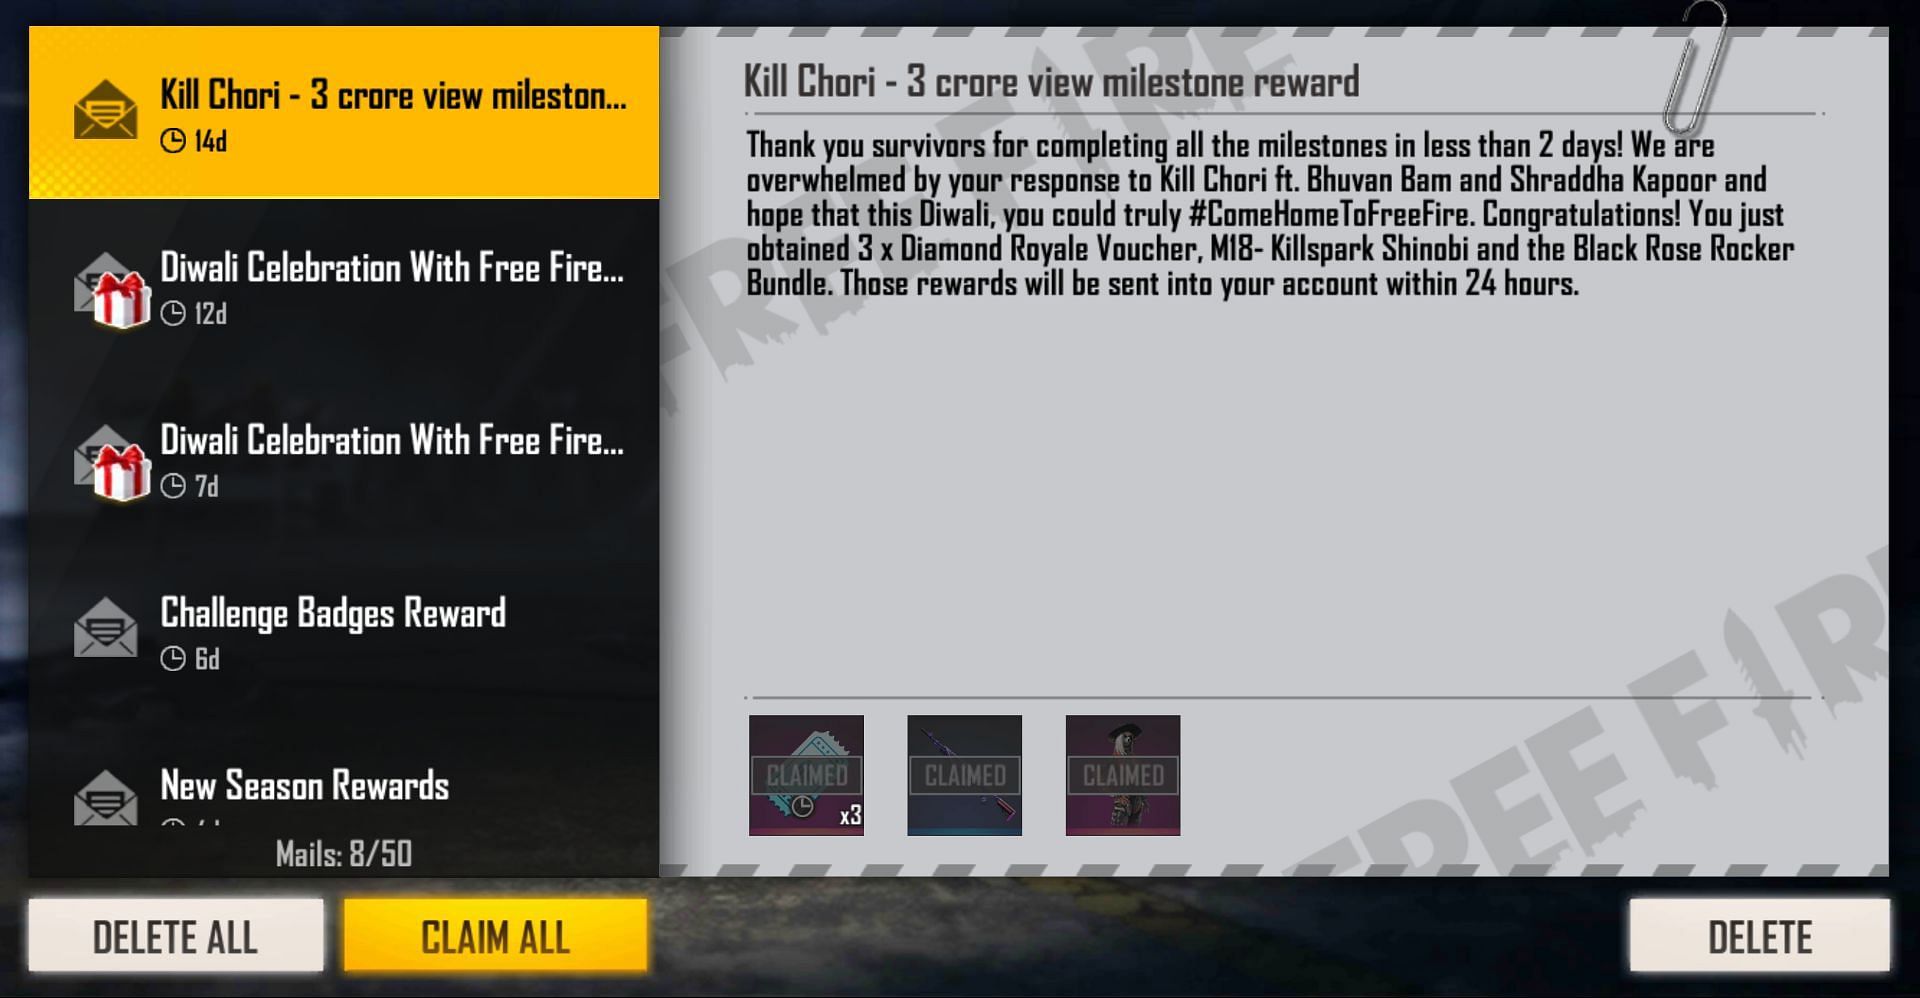 After claiming the bundle, you can equip it through the vault tab in Free Fire (Image via Free Fire)